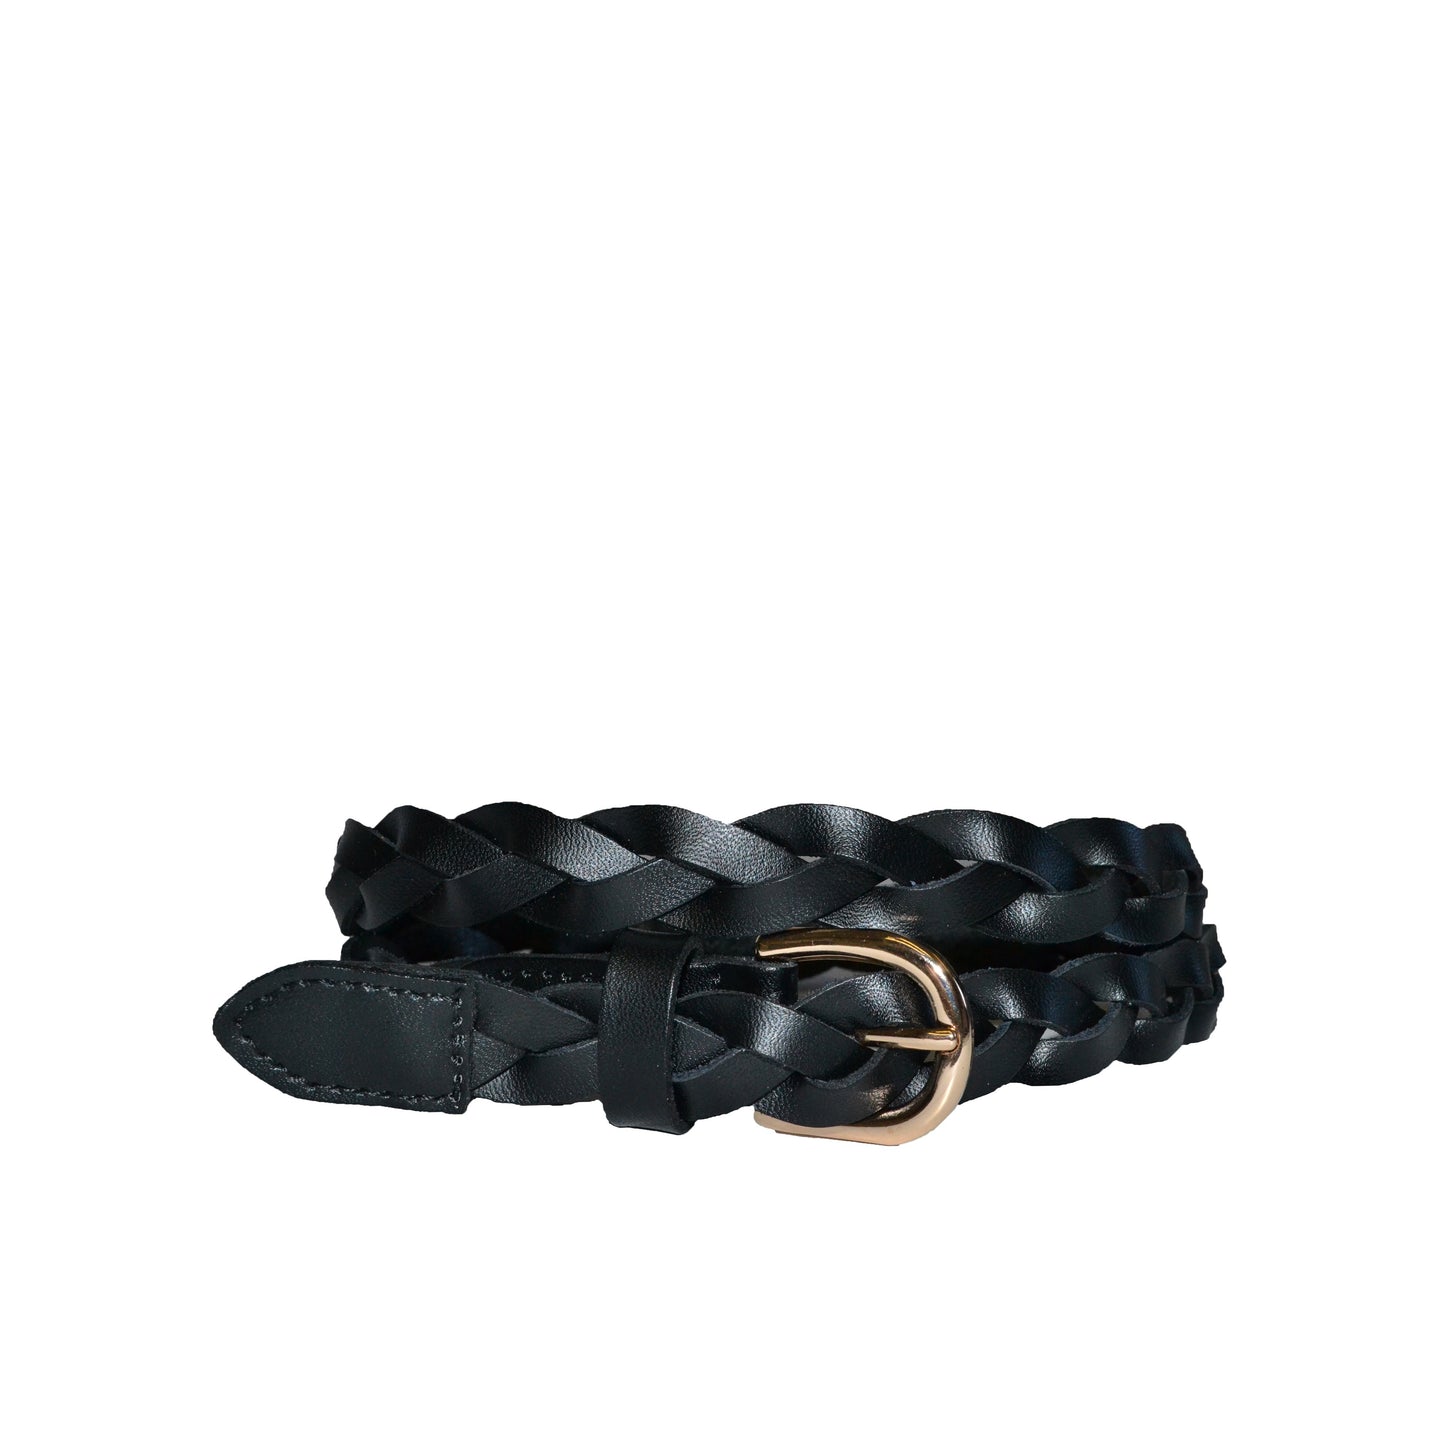 WAVERLY - Womens Black Skinny Leather Plaited Belt with Gold Buckle ...